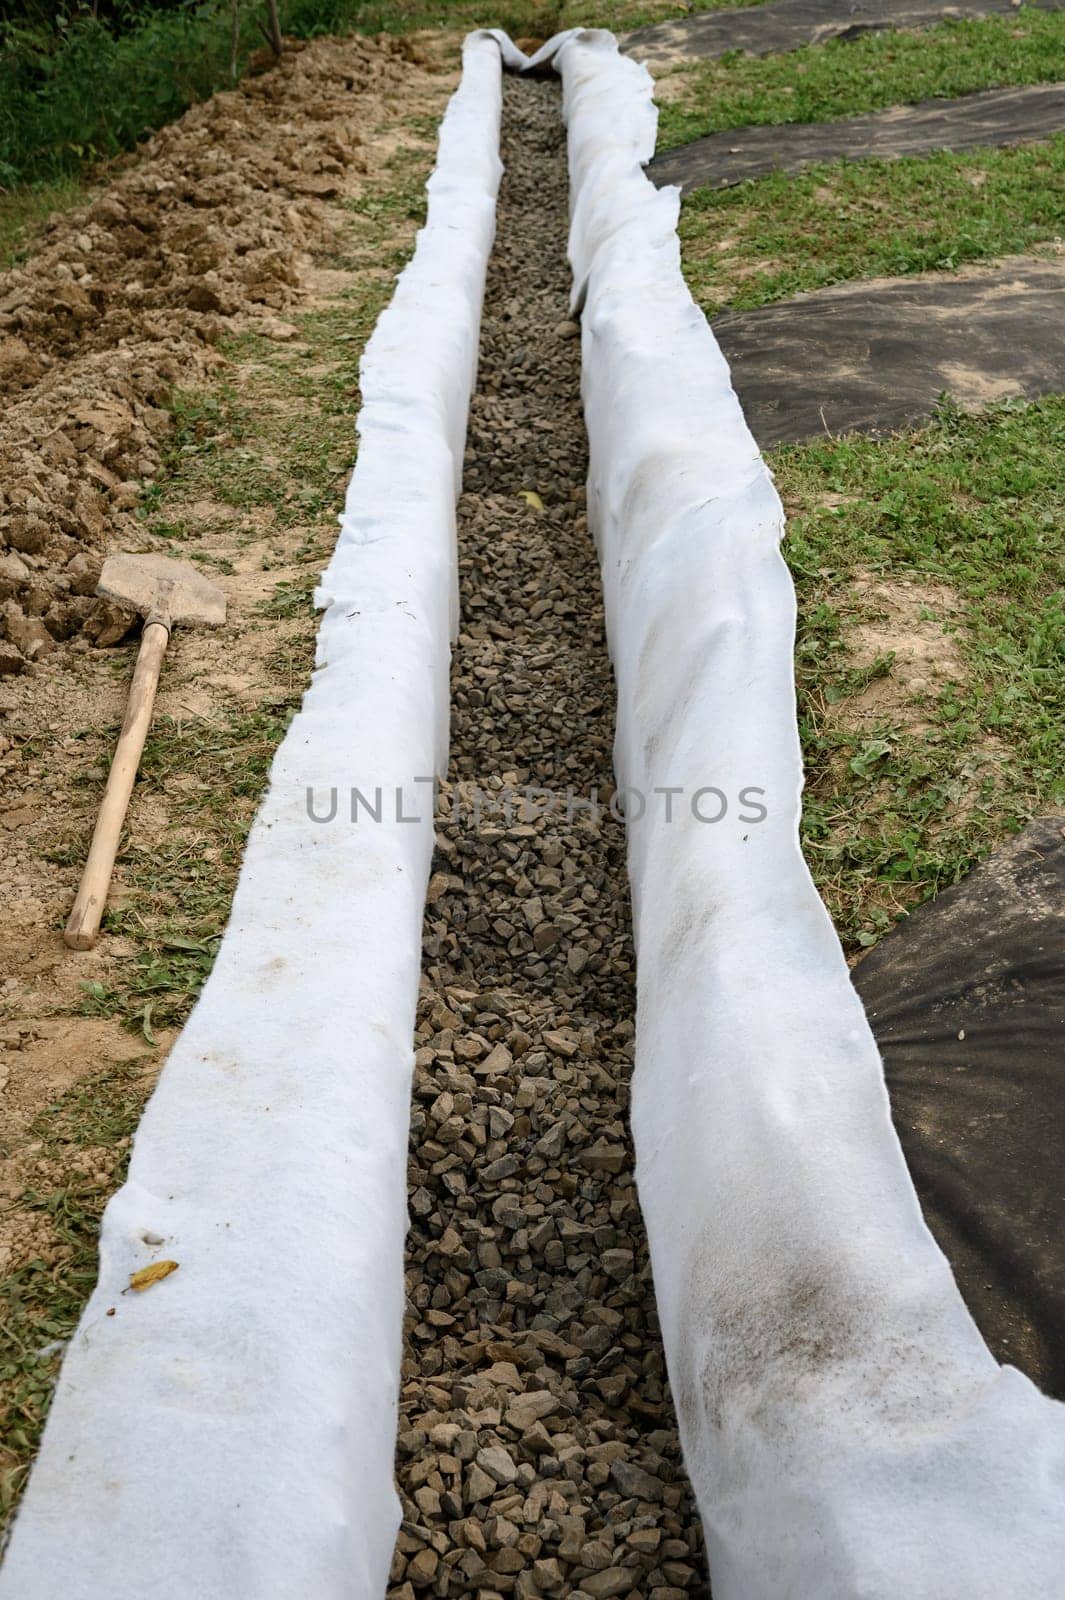 The drainage trench is covered with geotextile and filled with crushed stone to drain ground water from the site and adjacent territory